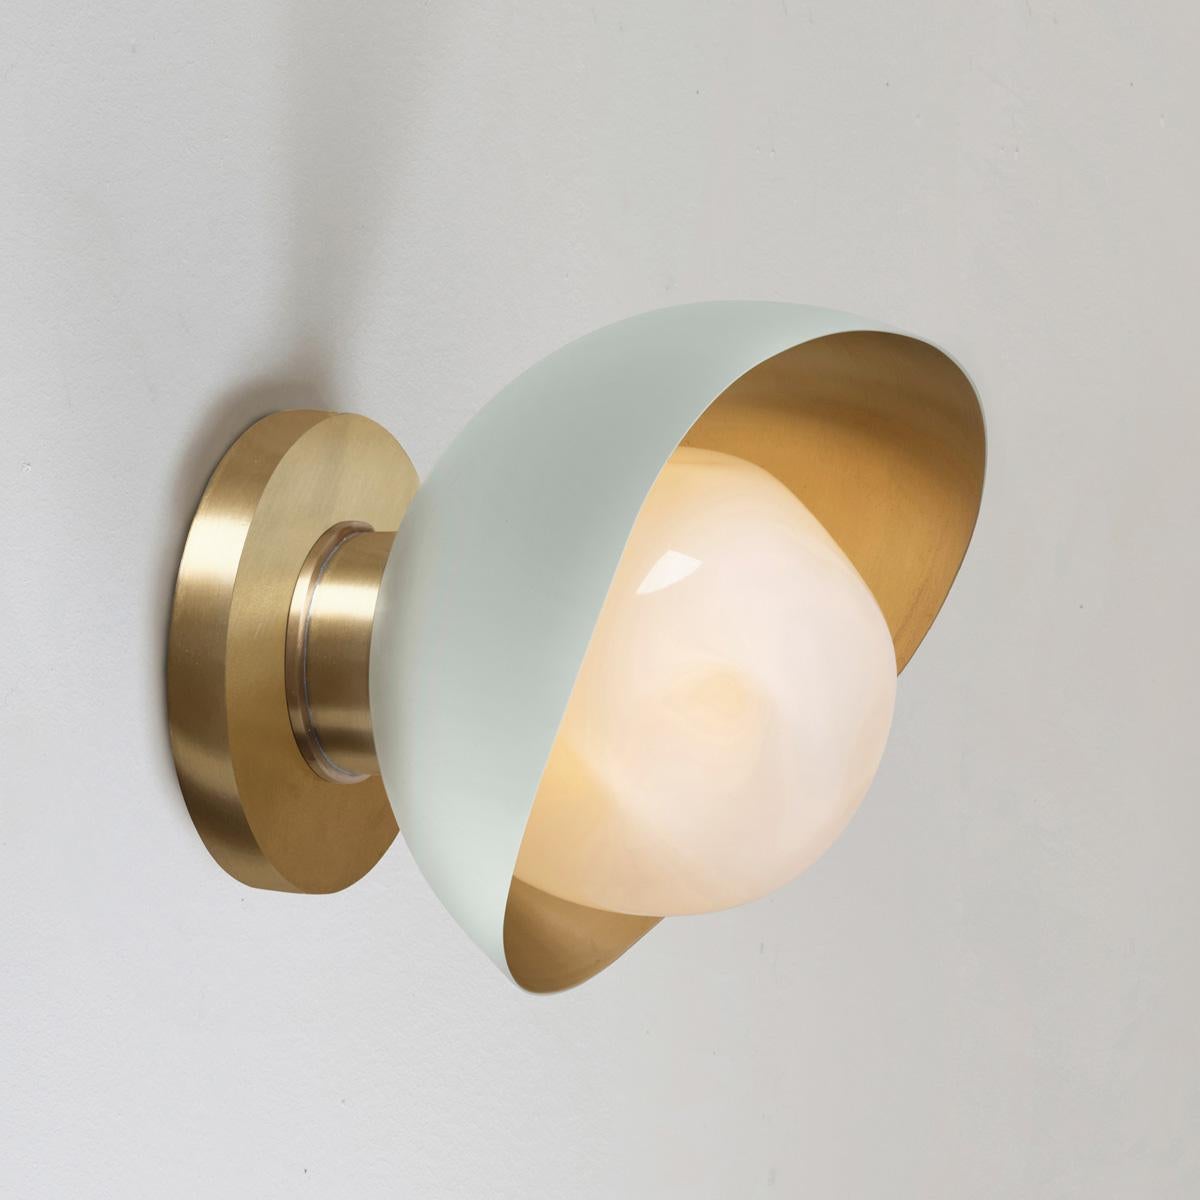 The Perla Mini wall light is the smallest member of the Perla collection featuring an organic brass shell nestling our Sfera glass handblown in Murano. See the Perla and Perla Grande for larger models.

The primary images show it in Lerici Acqua and